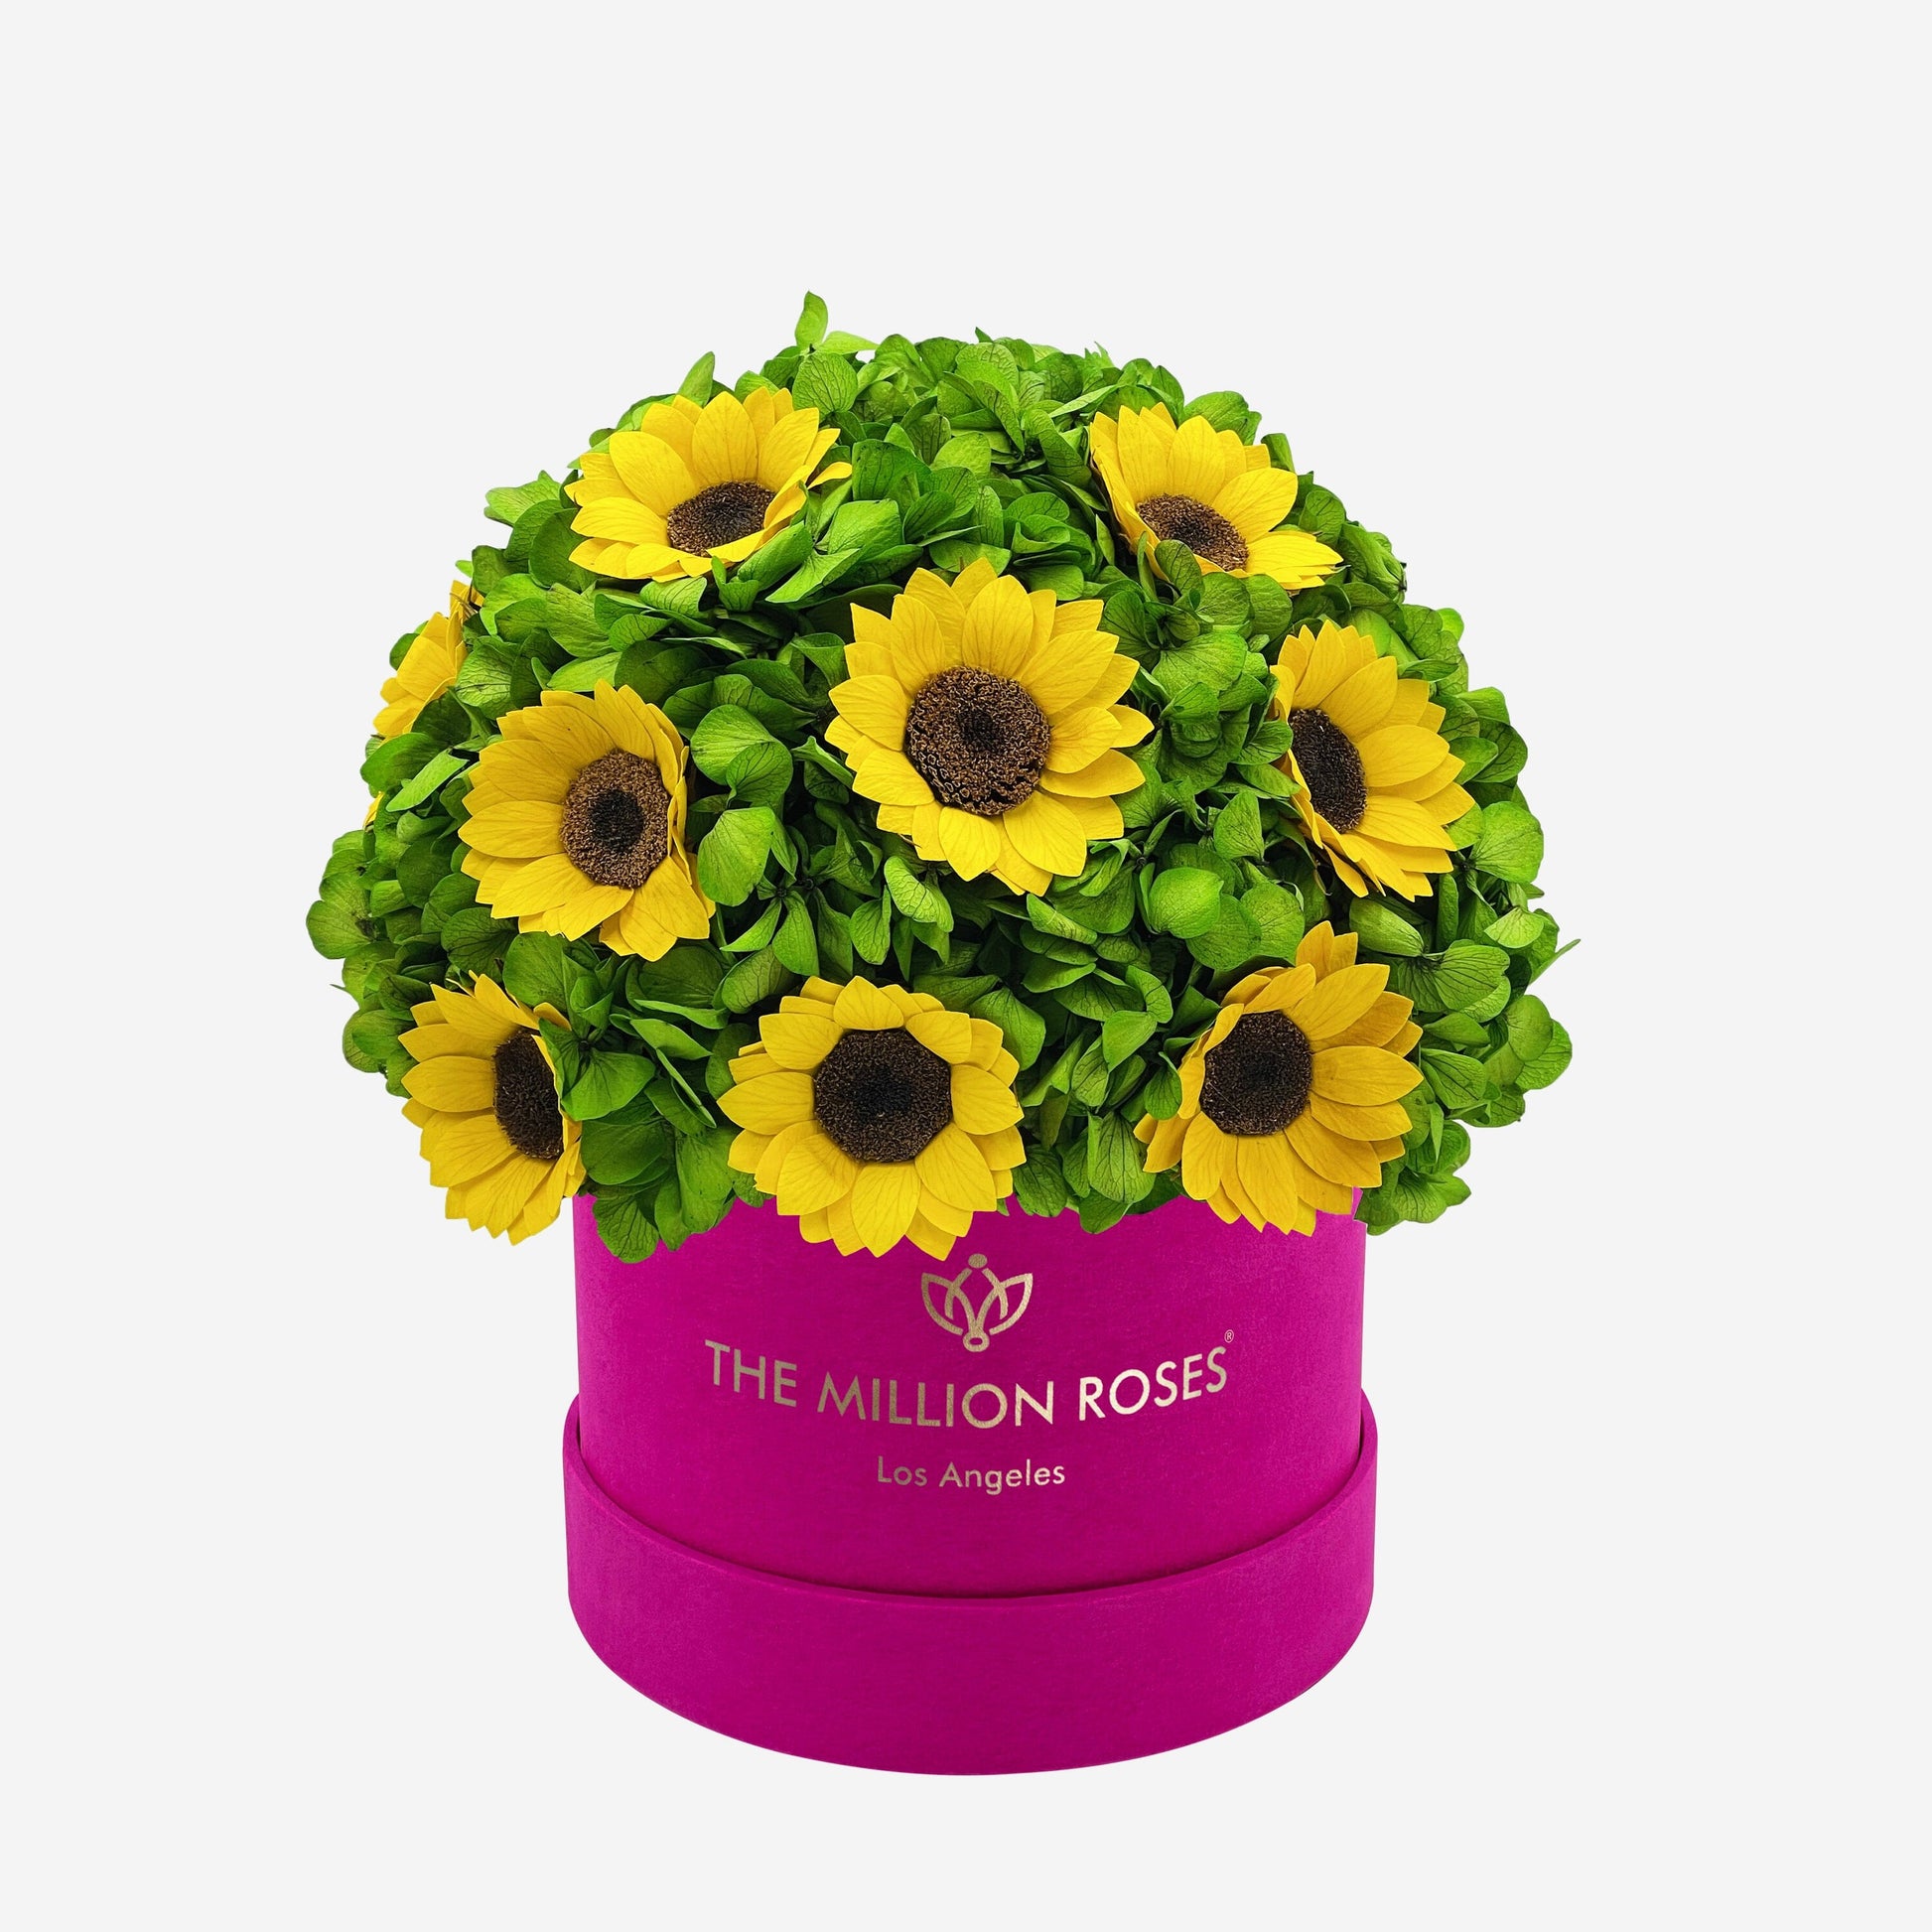 Classic Hot Pink Suede Box | Green Hydrangeas & Sunflowers - The Million Roses